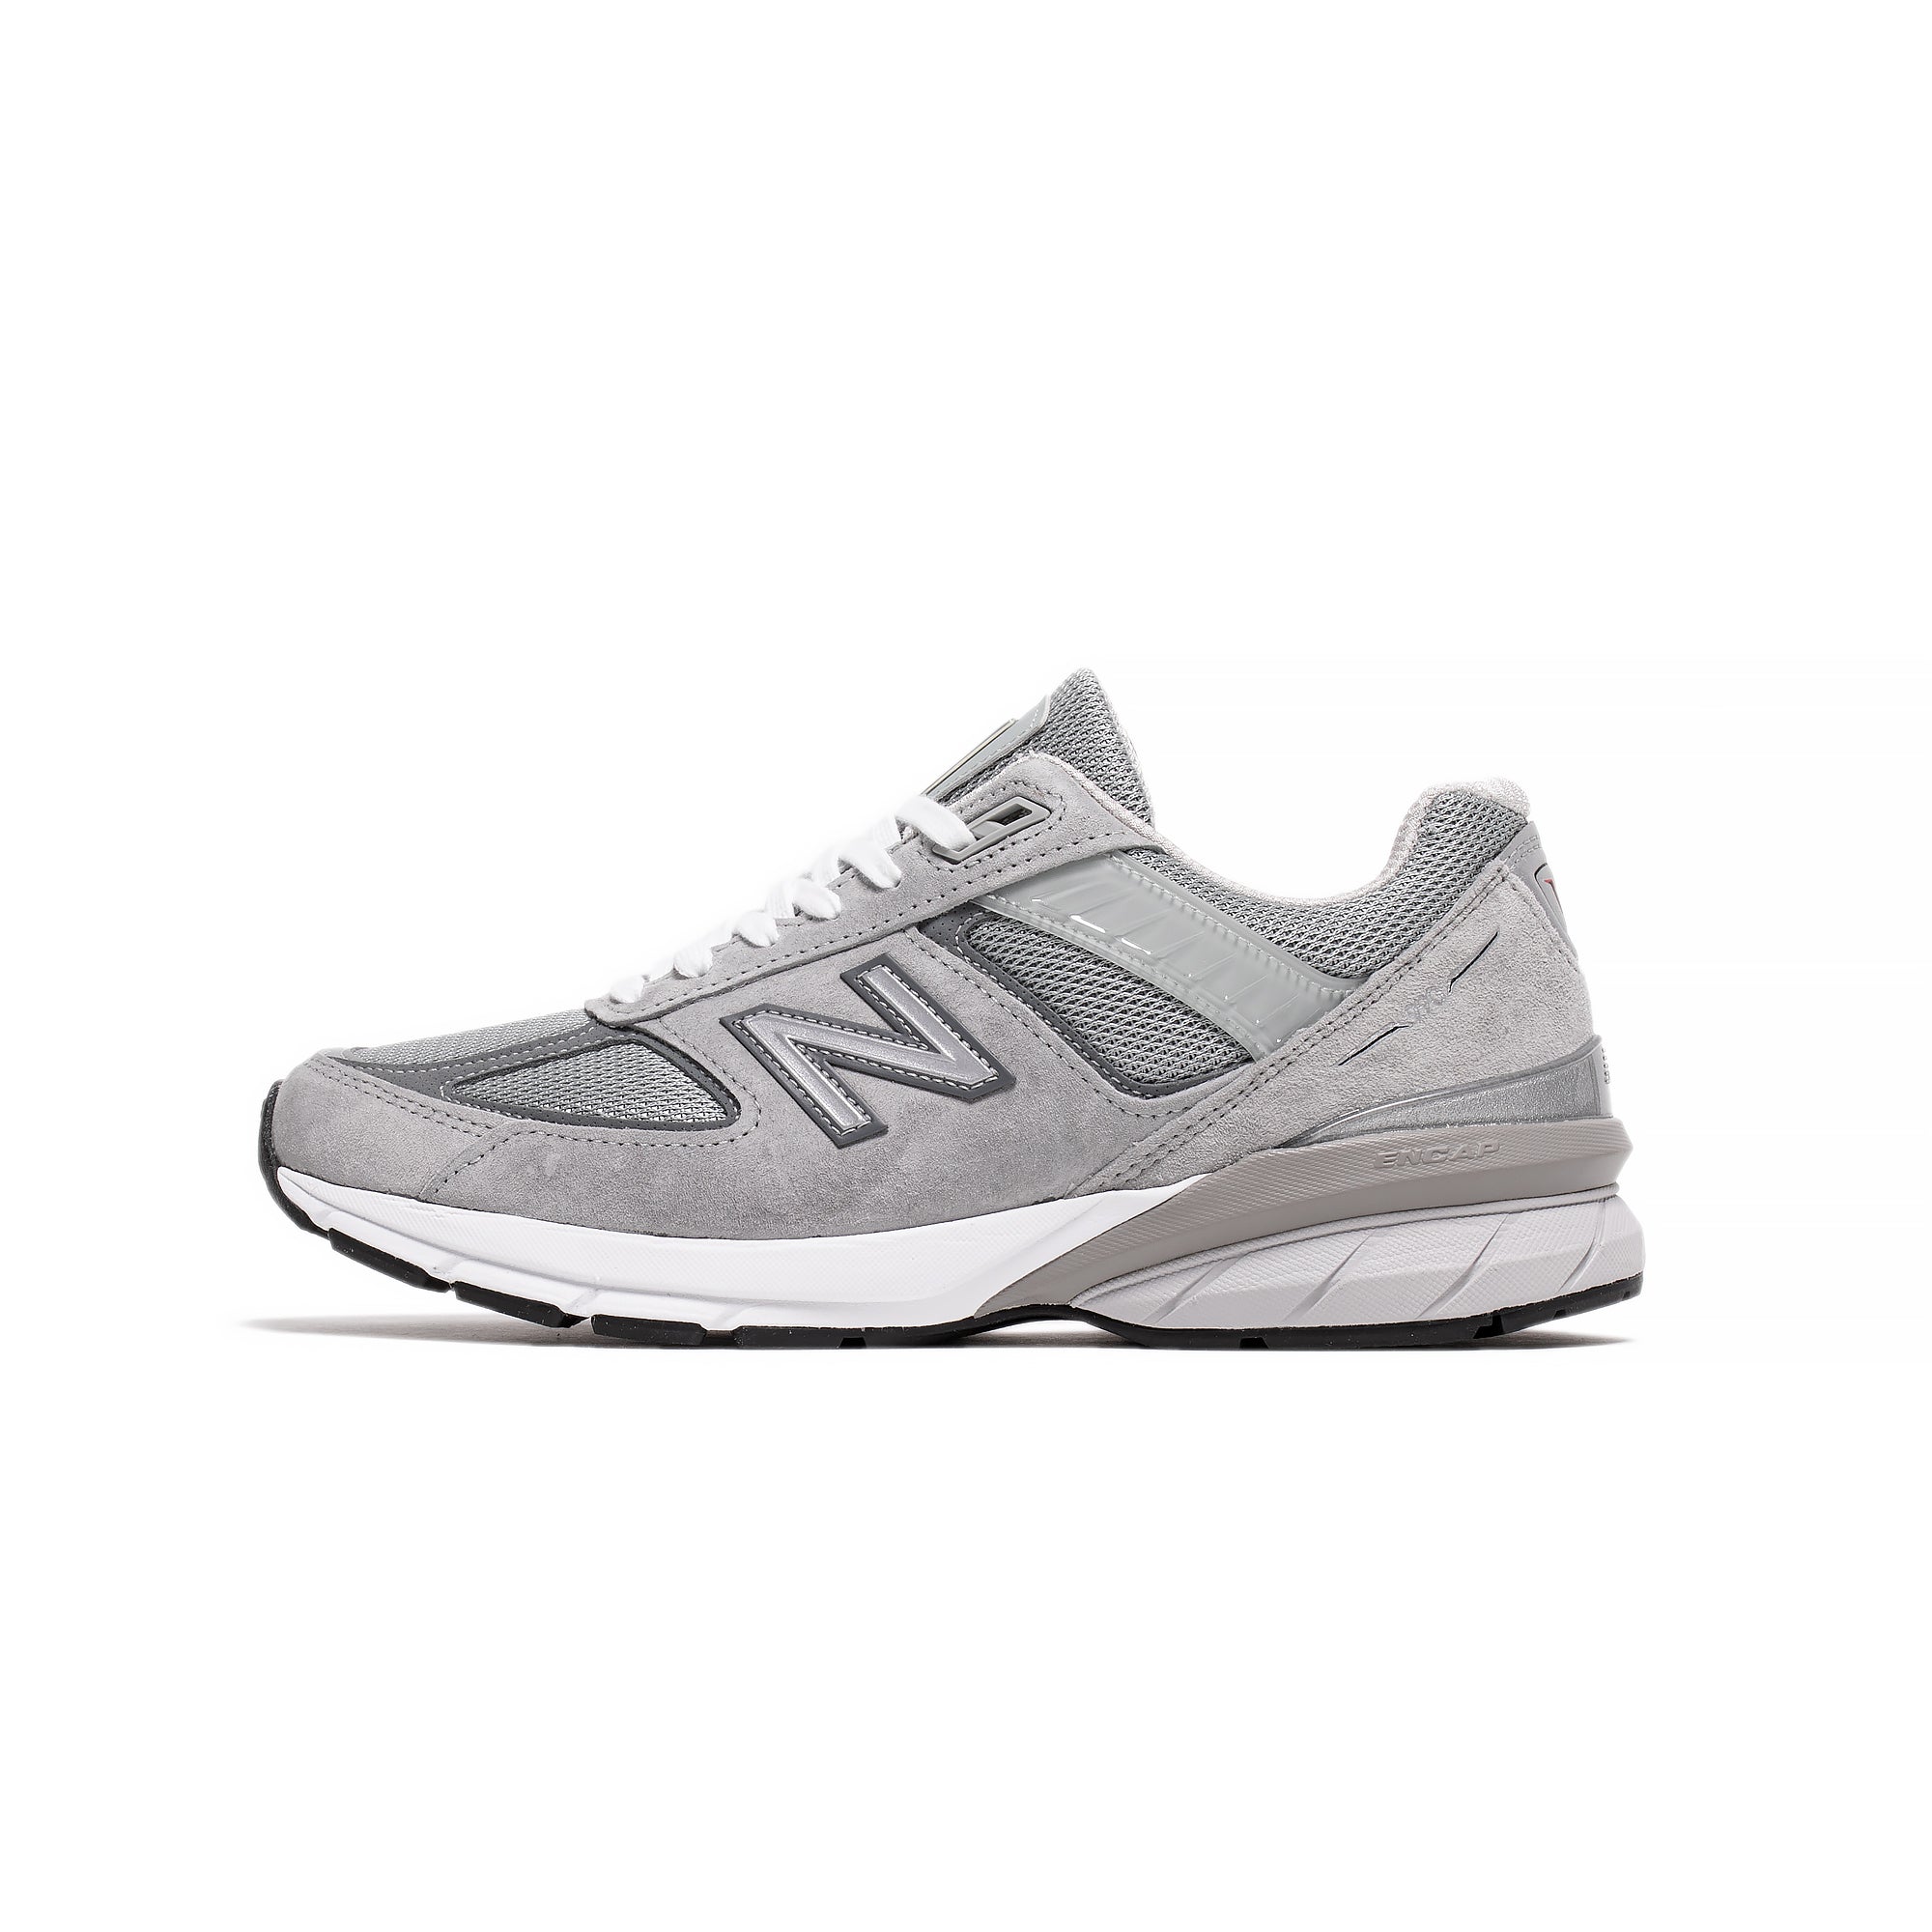 New Balance Mens 990V5 Made in USA Shoes